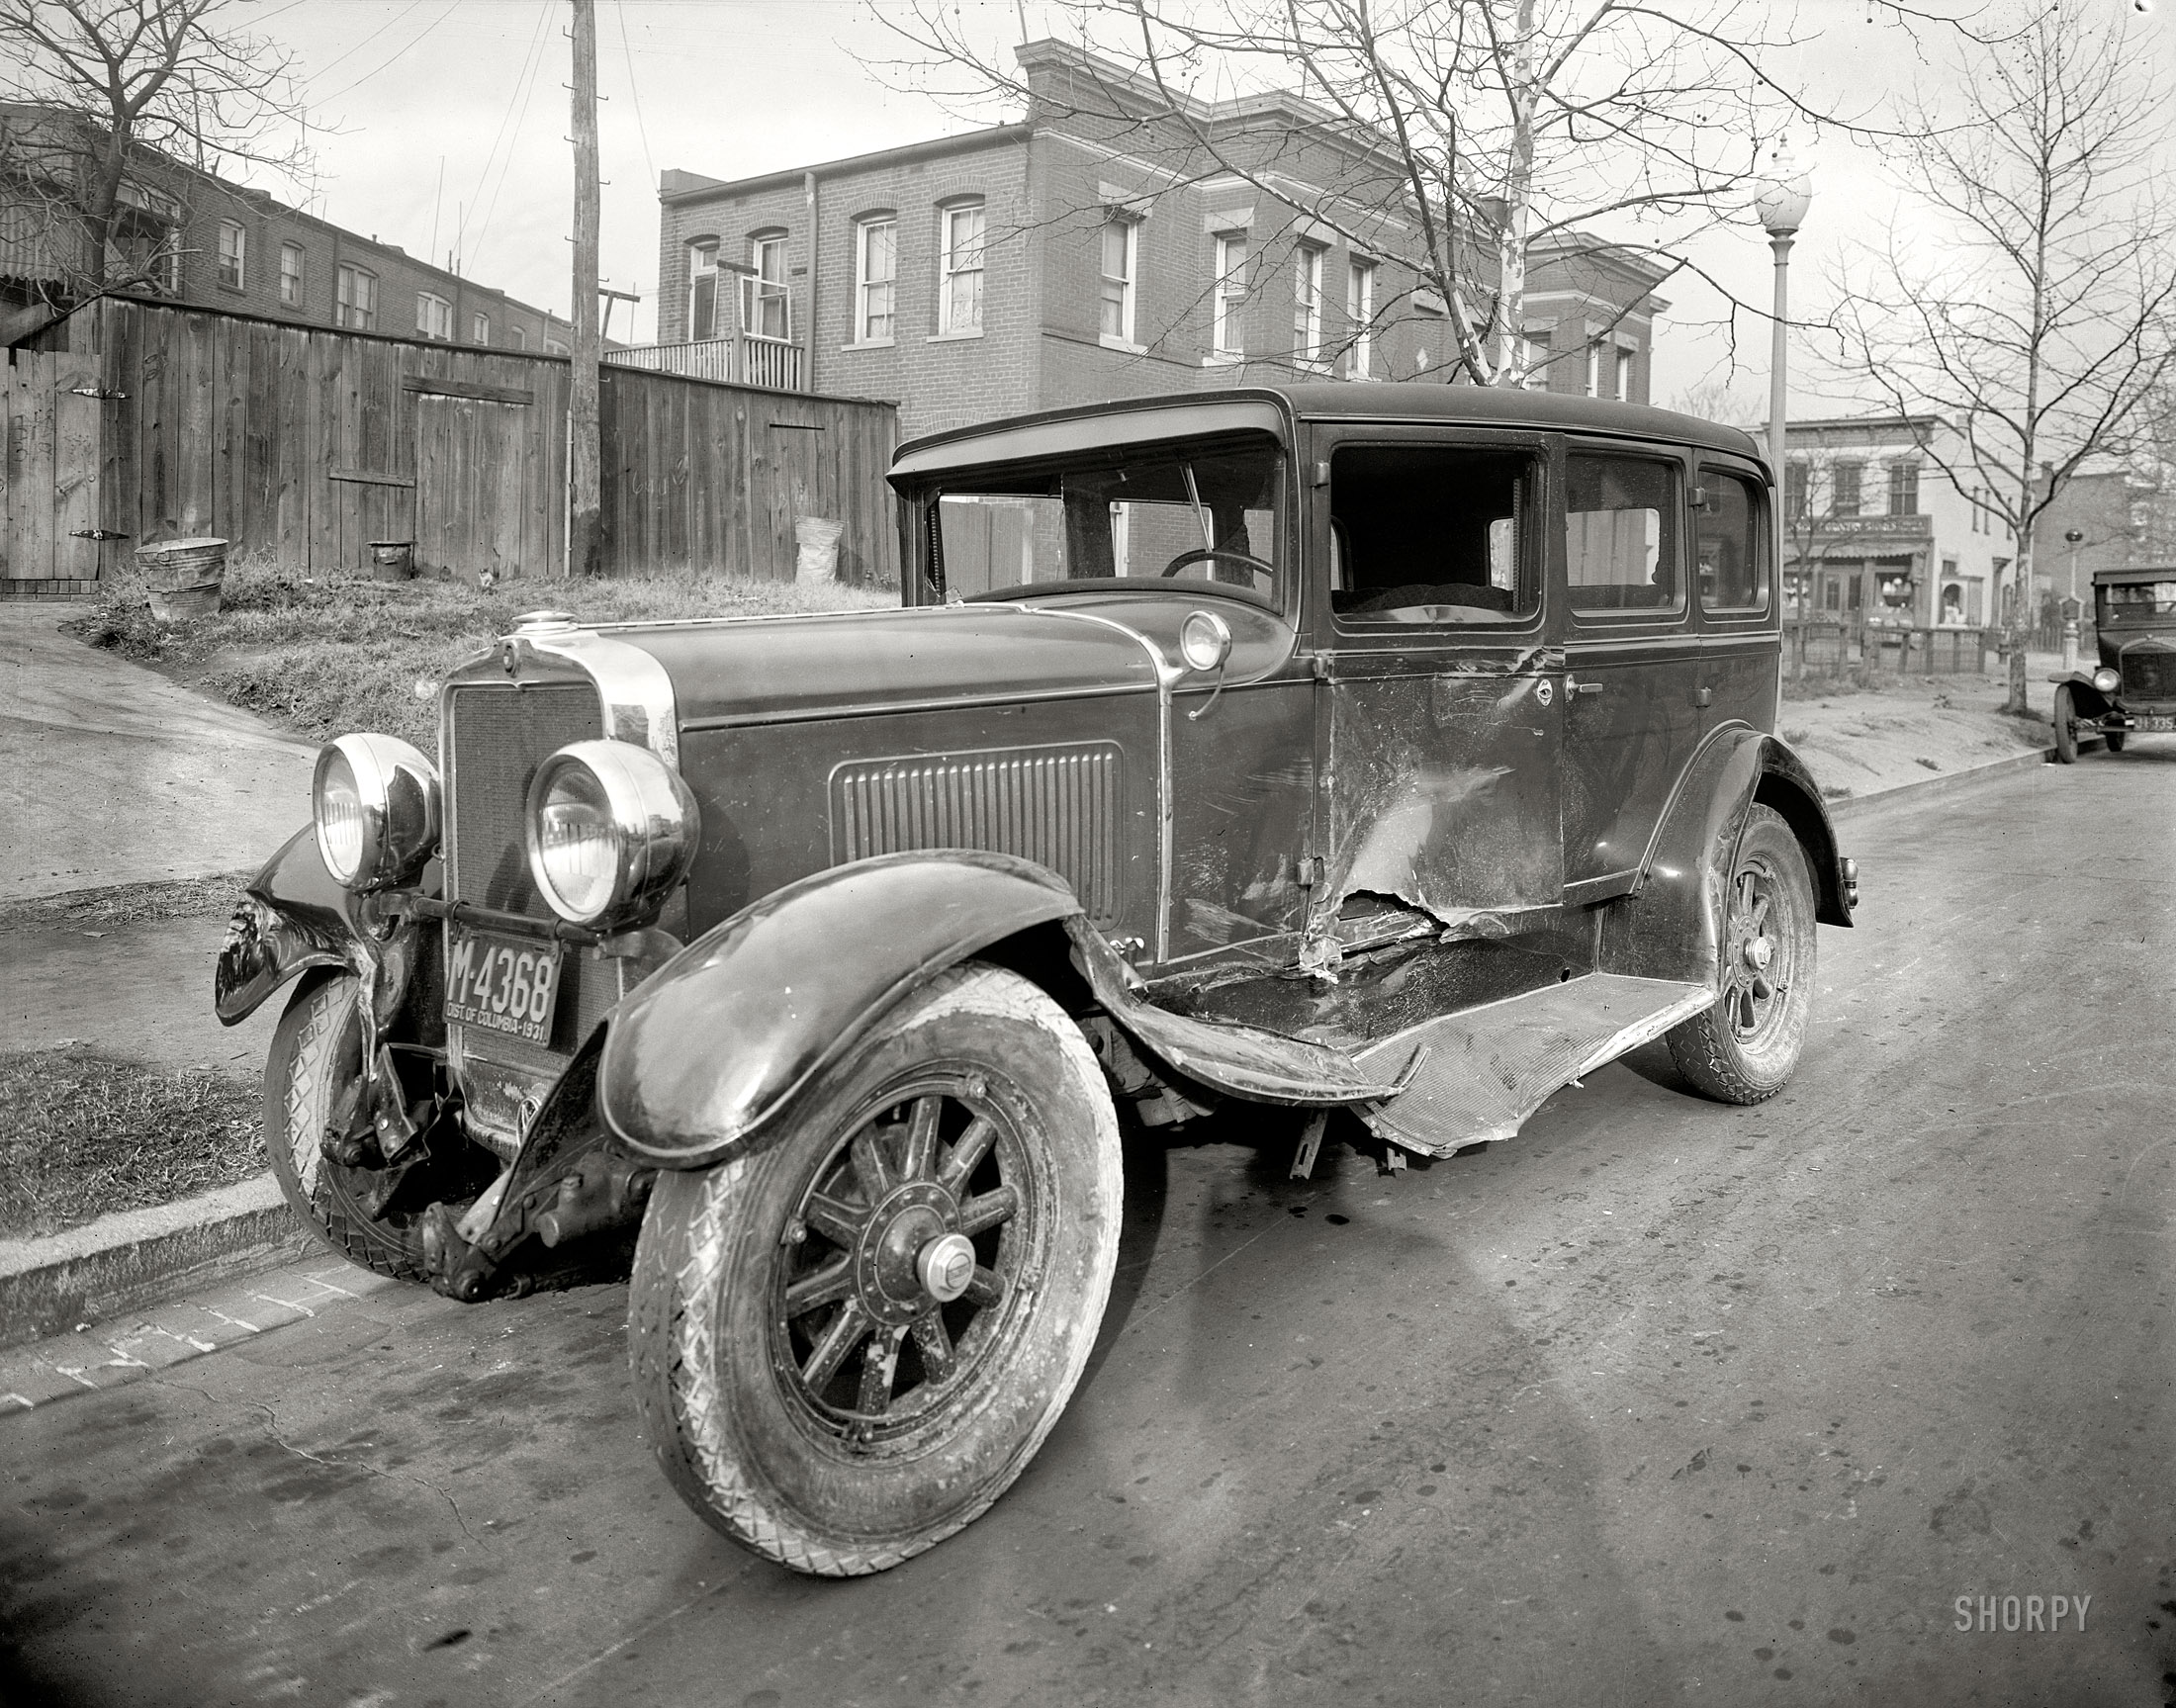 Washington, D.C., 1931. "Auto accident." I will leave it up to Shorpy Nation to determine the location and make of this dented dreadnought. 8x10 safety negative, National Photo Company Collection. View full size.